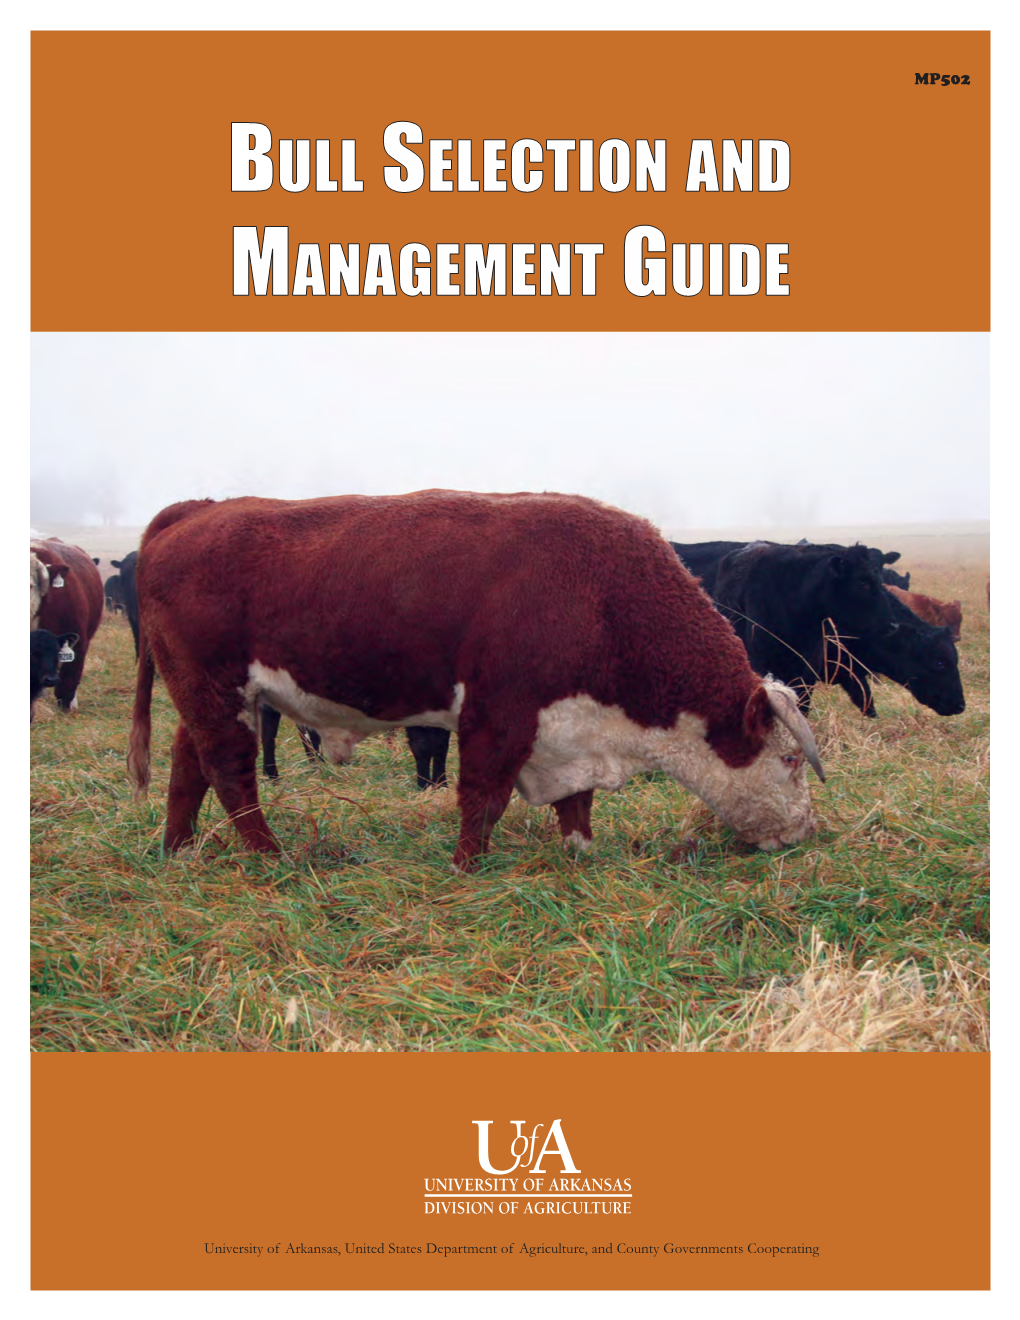 Bull Selection and Management Guide